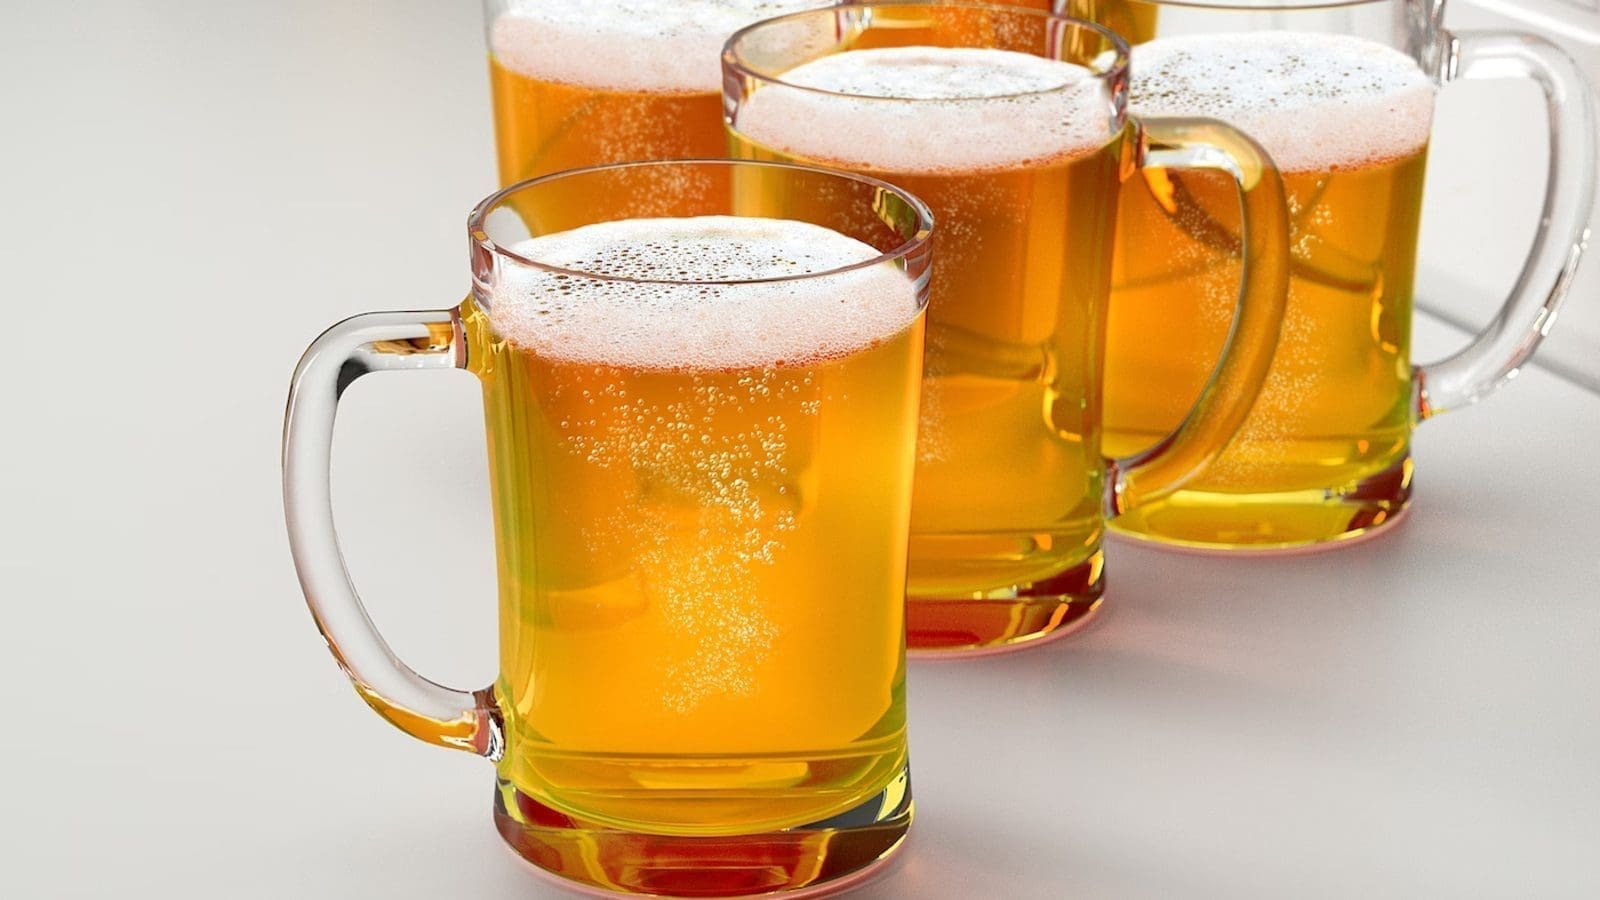 IFF unveils new enzymatic solution to aid brewers stabilize beer more efficiently , sustainably